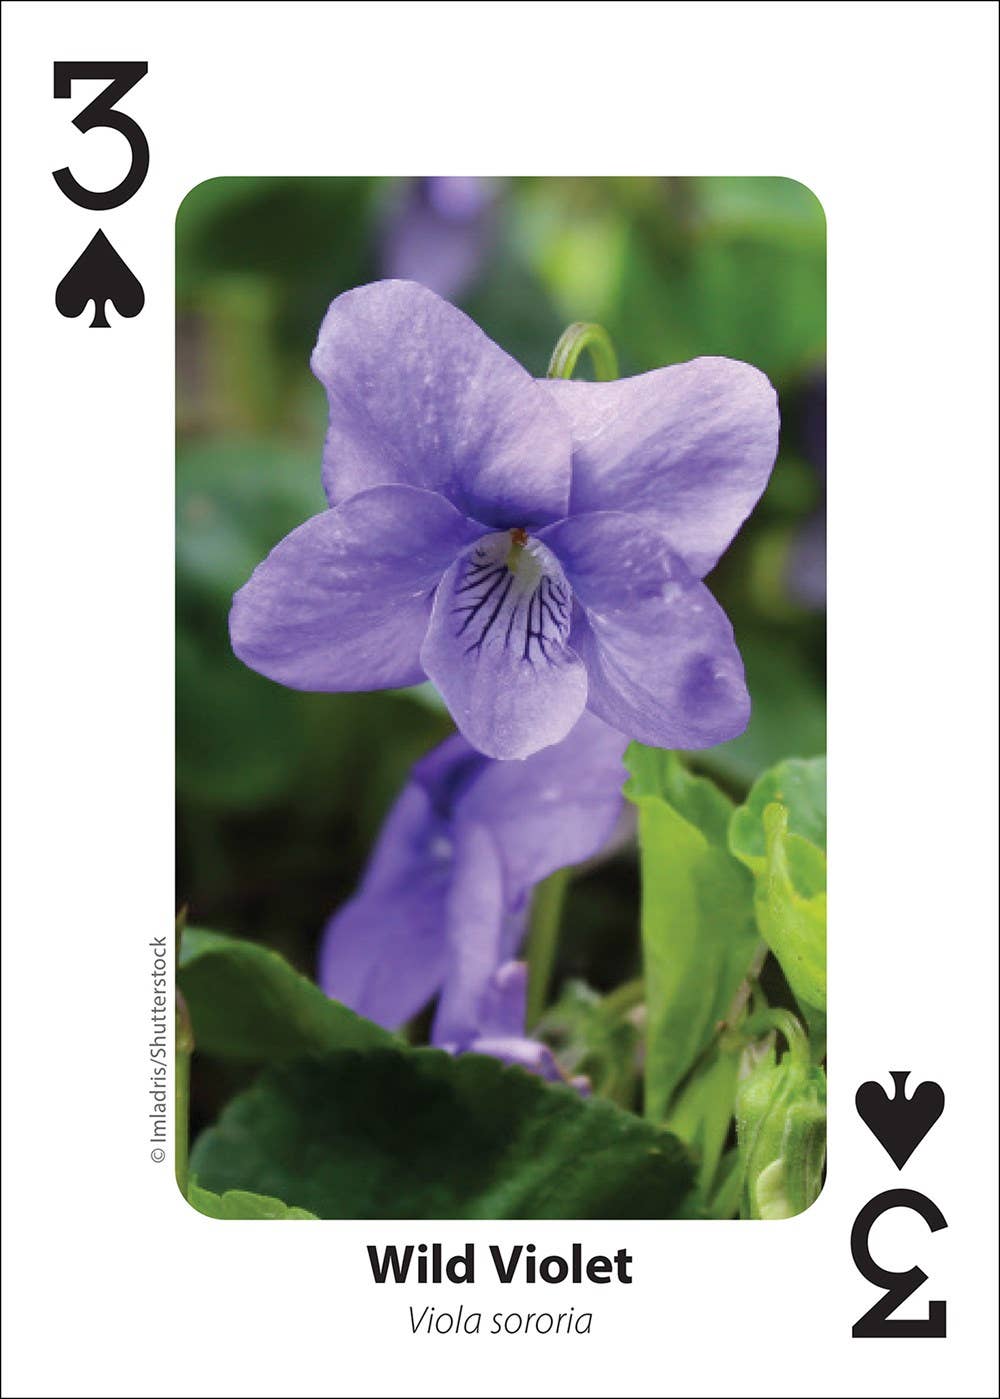 Foraging Playing Cards